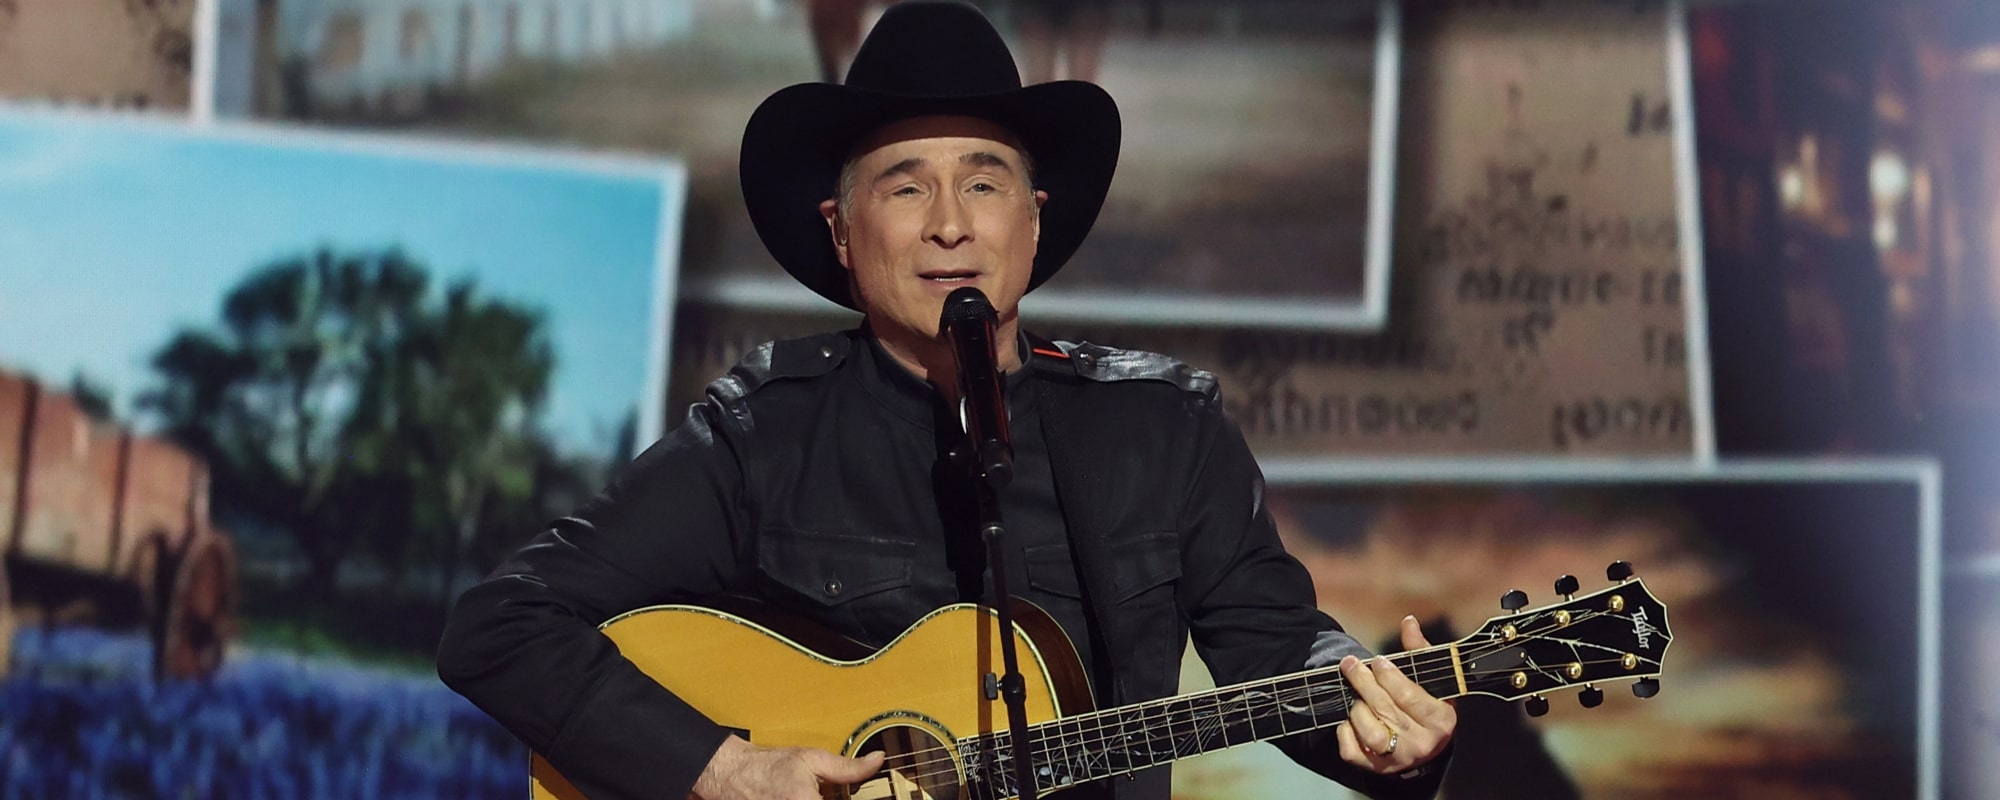 Grand Ole Opry to Celebrate 50 Years at the Opry House with Clint Black, Connie Smith, Bill Anderson, and More